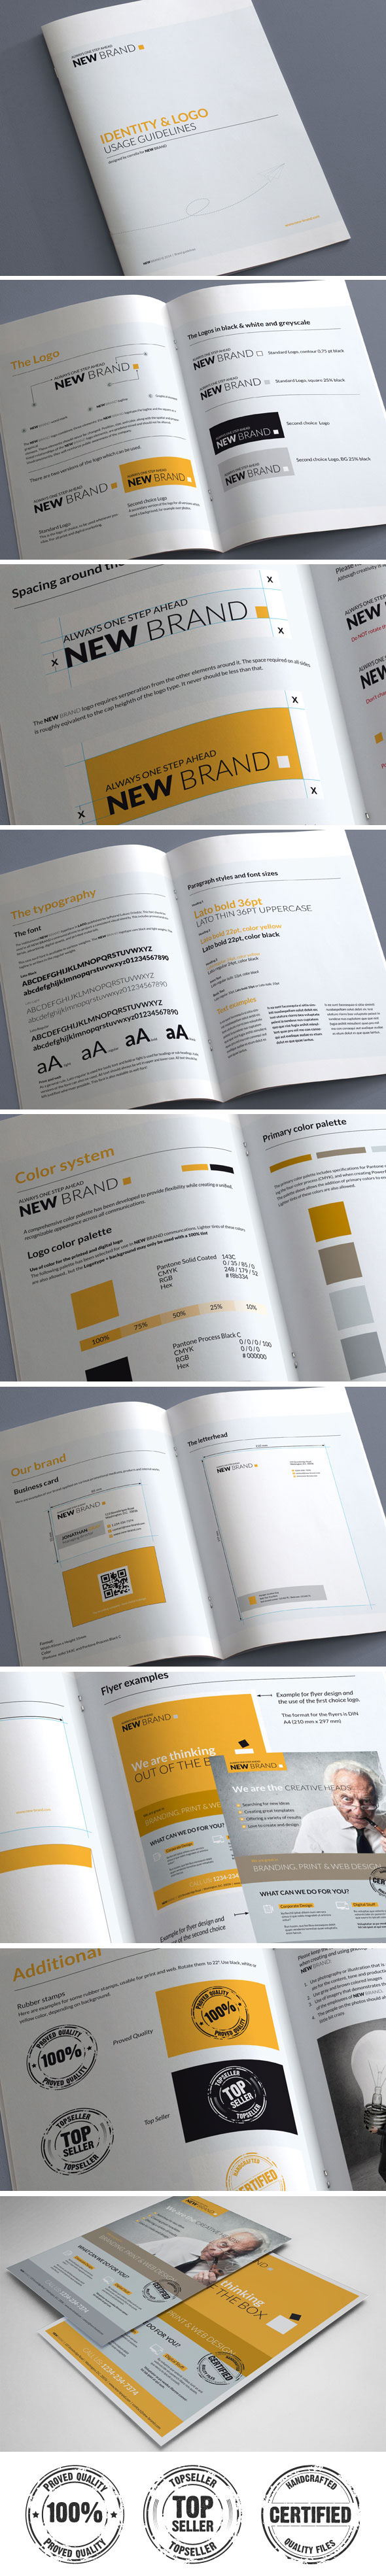 brand guidelines Style Guide template InDesign flyer business card